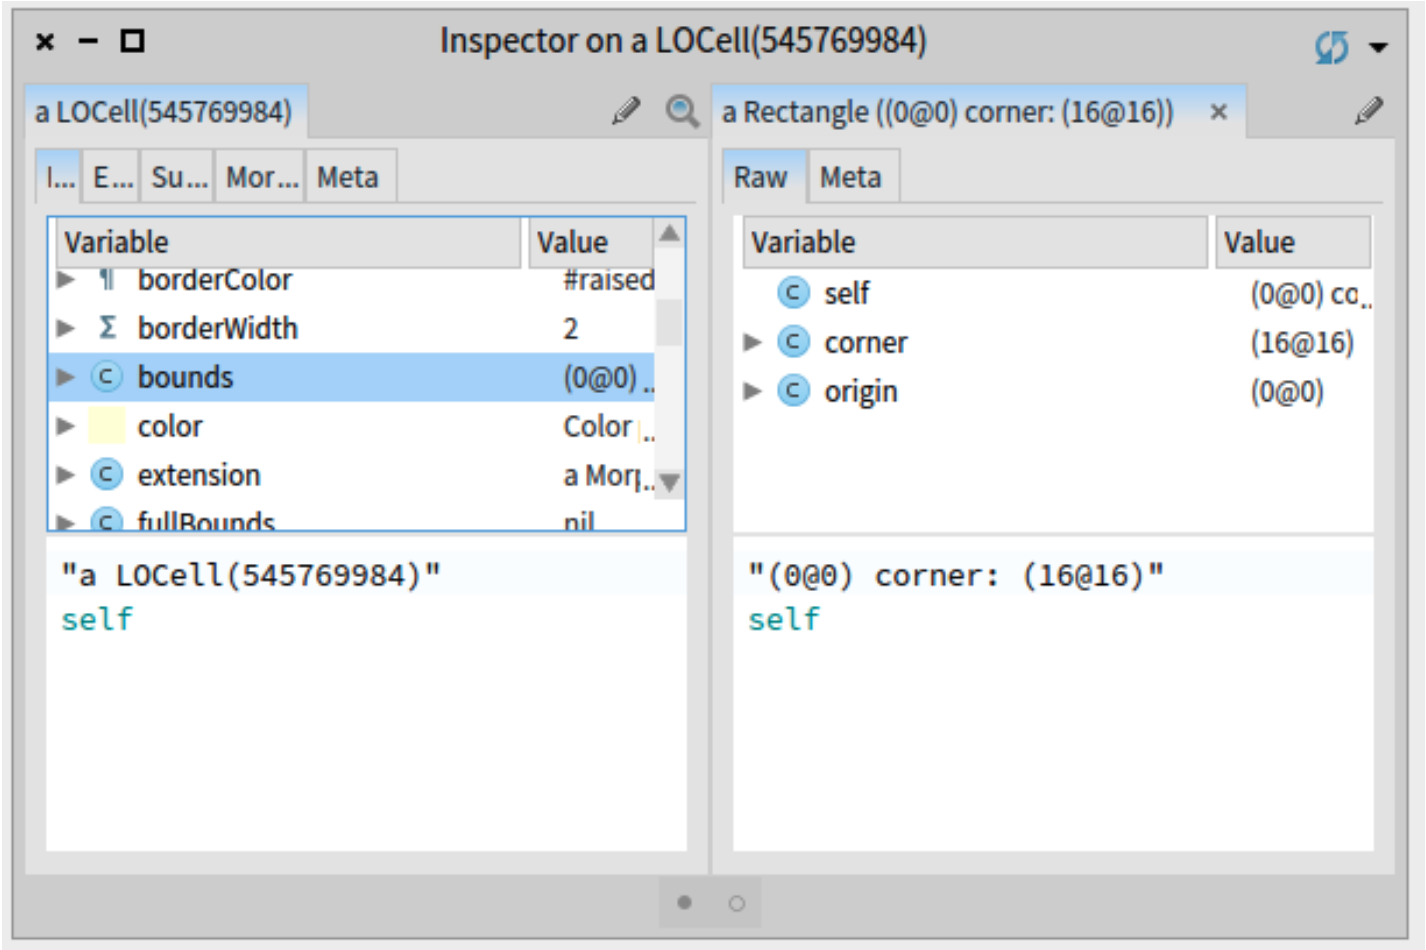 When we click on an instance variable, we inspect its value (another object).